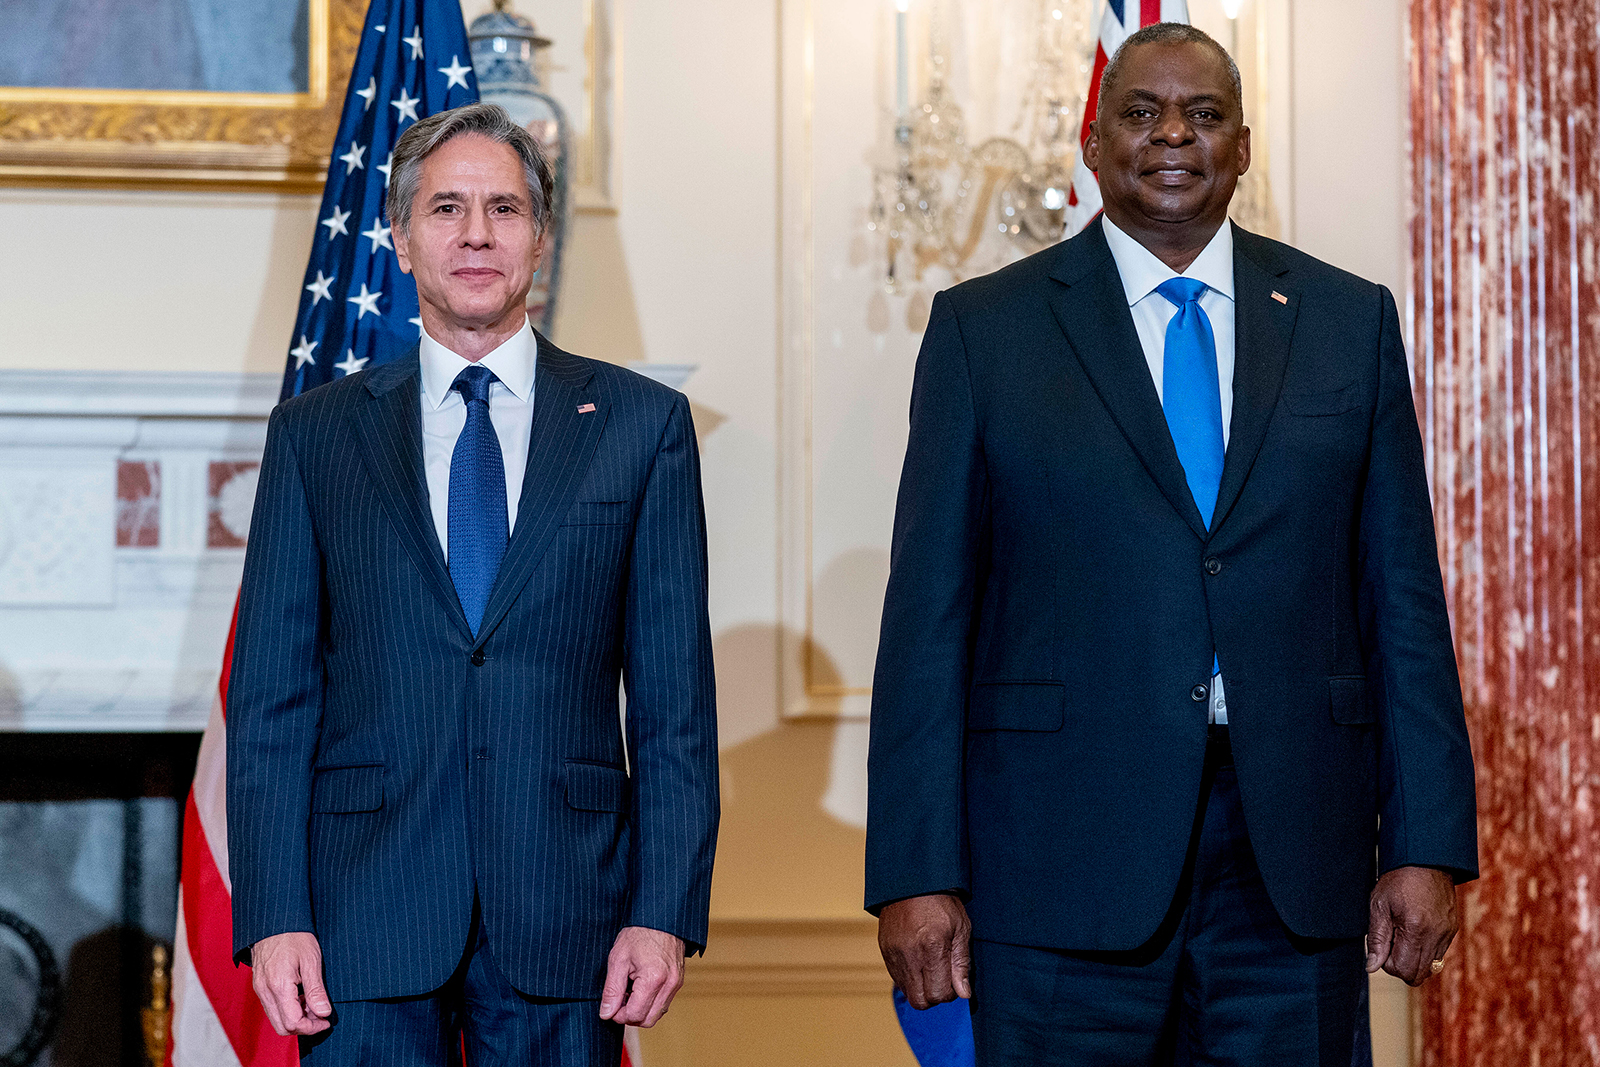 Secretary of State Antony Blinken, and Defense Secretary Lloyd Austin pose for a photograph at the State Department in Washington, on Thursday, Sept. 16, 2021. 